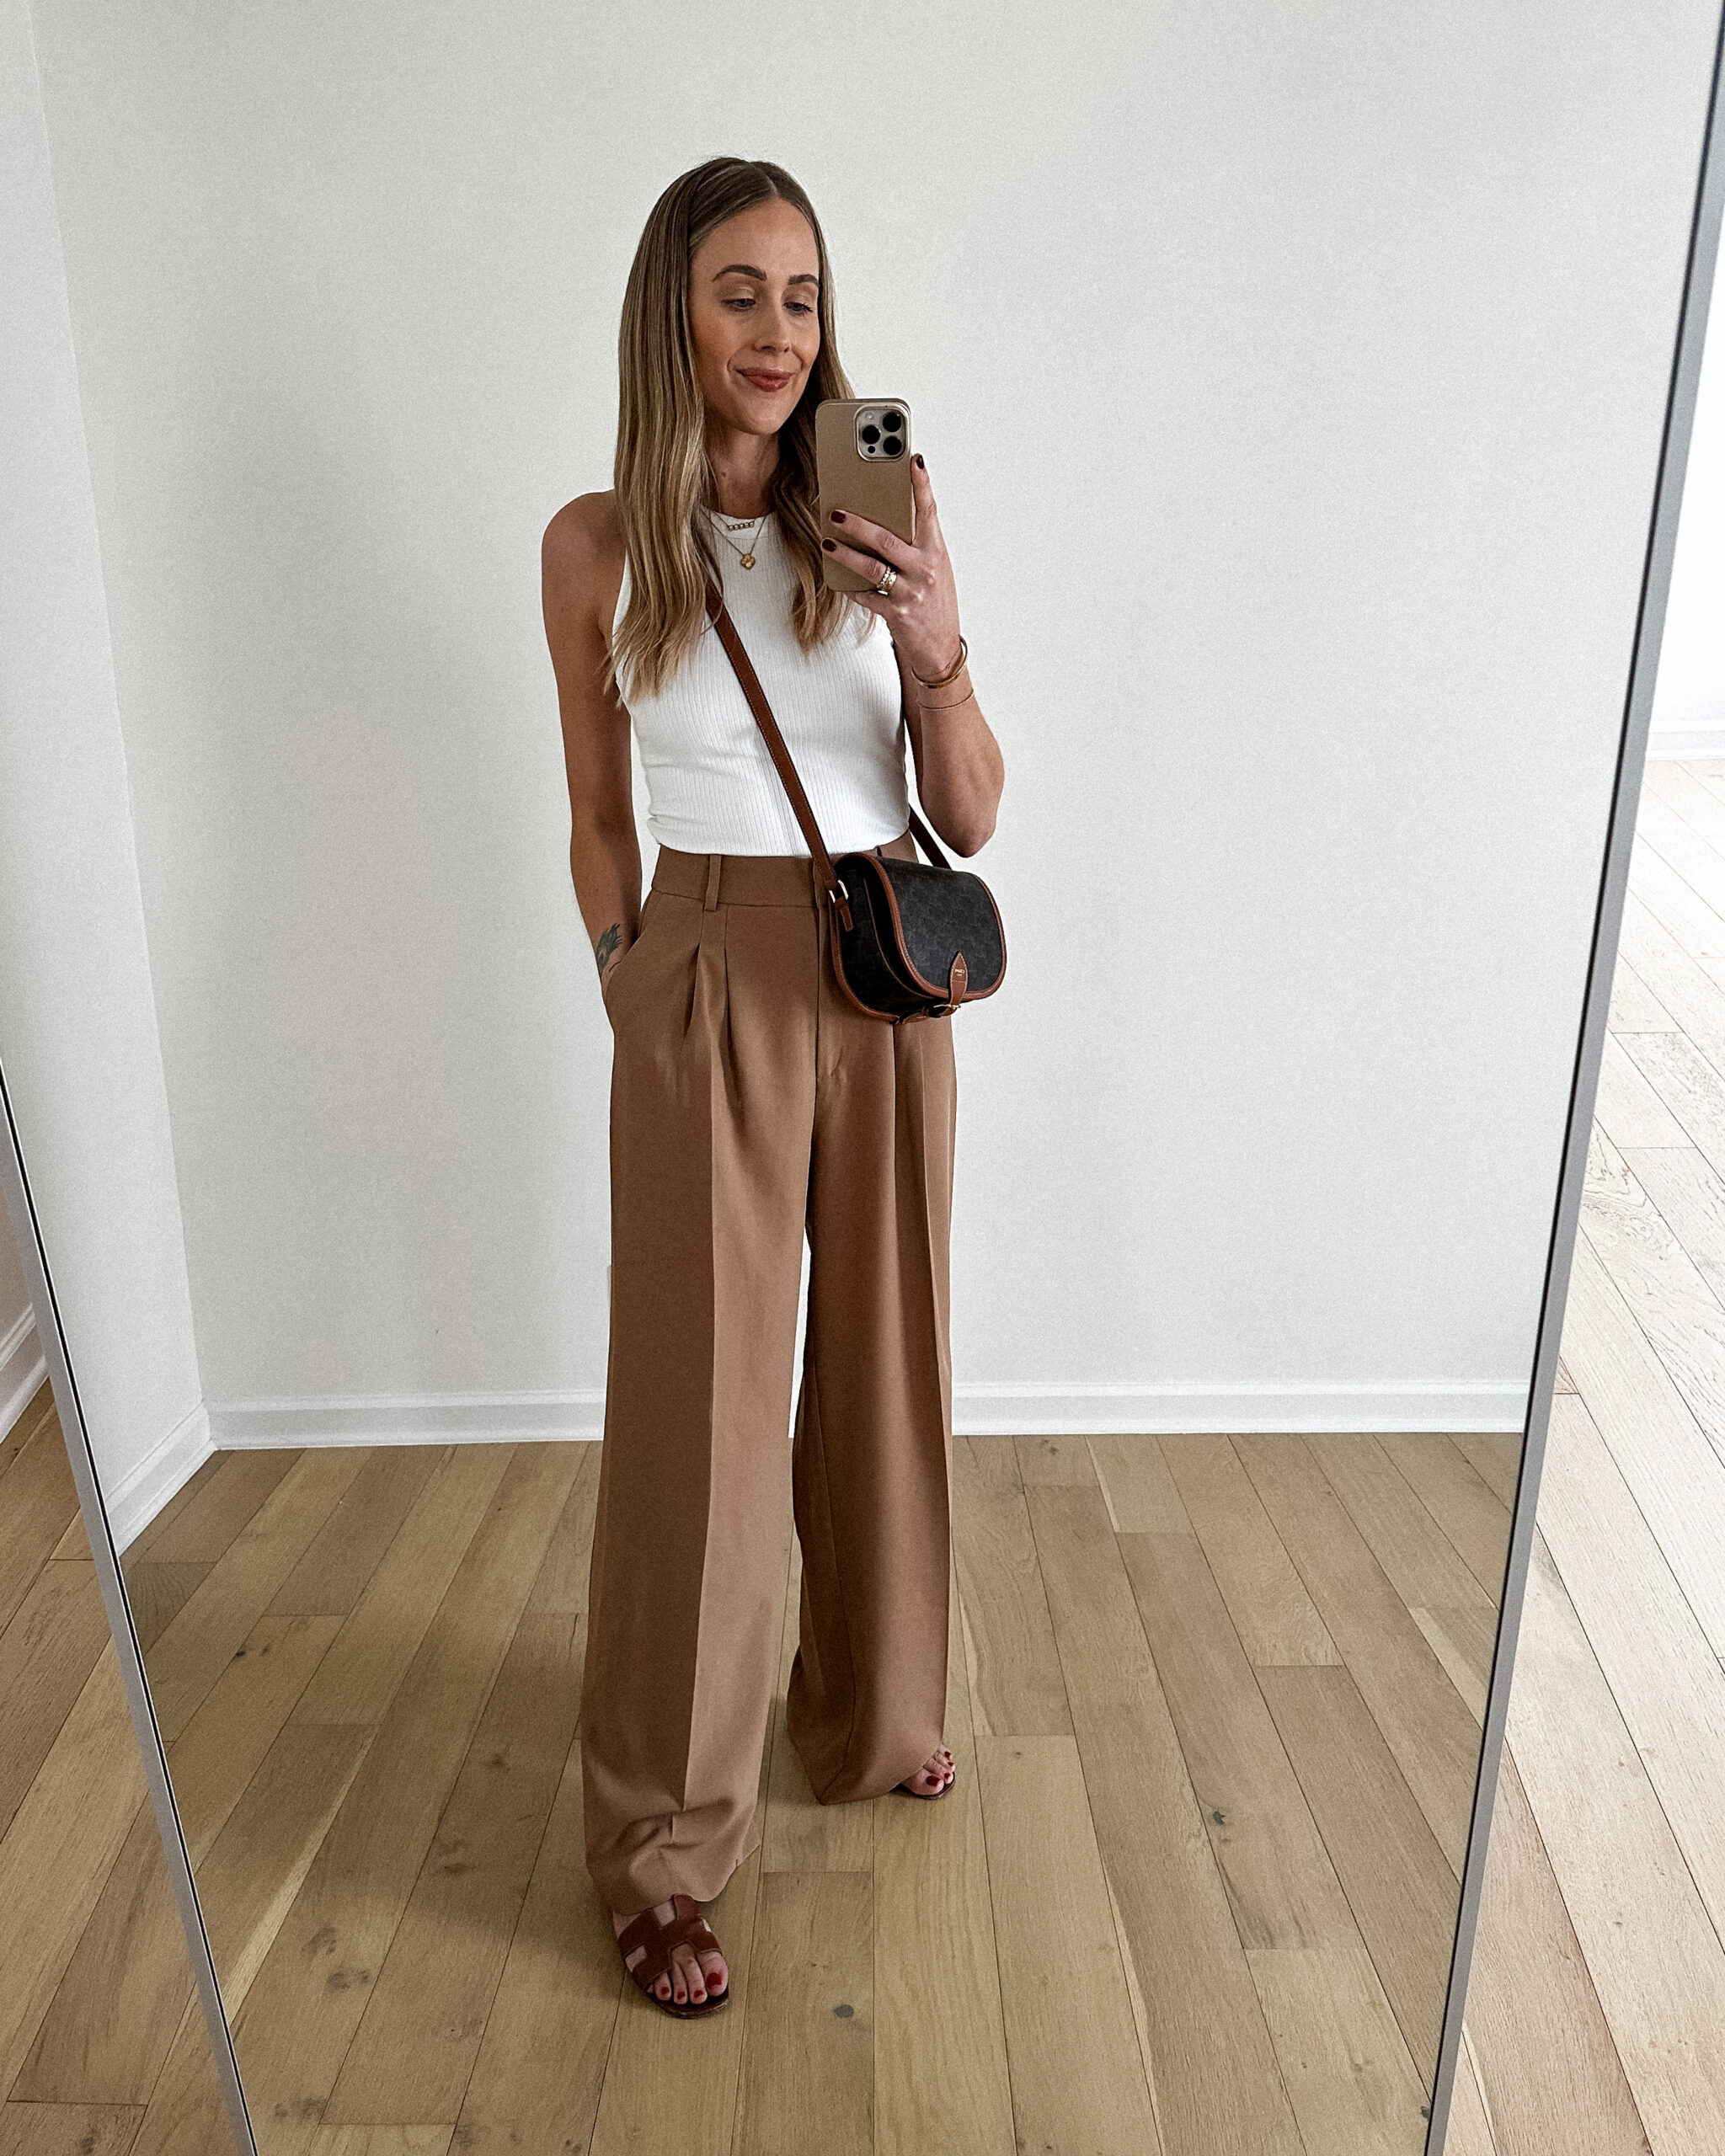 Fashion Jackson wearing MAYSON the label white rib fitted tank, tan trouser pants, heremes oran gold sandals, celine logo crossbody handbag, casual outfit